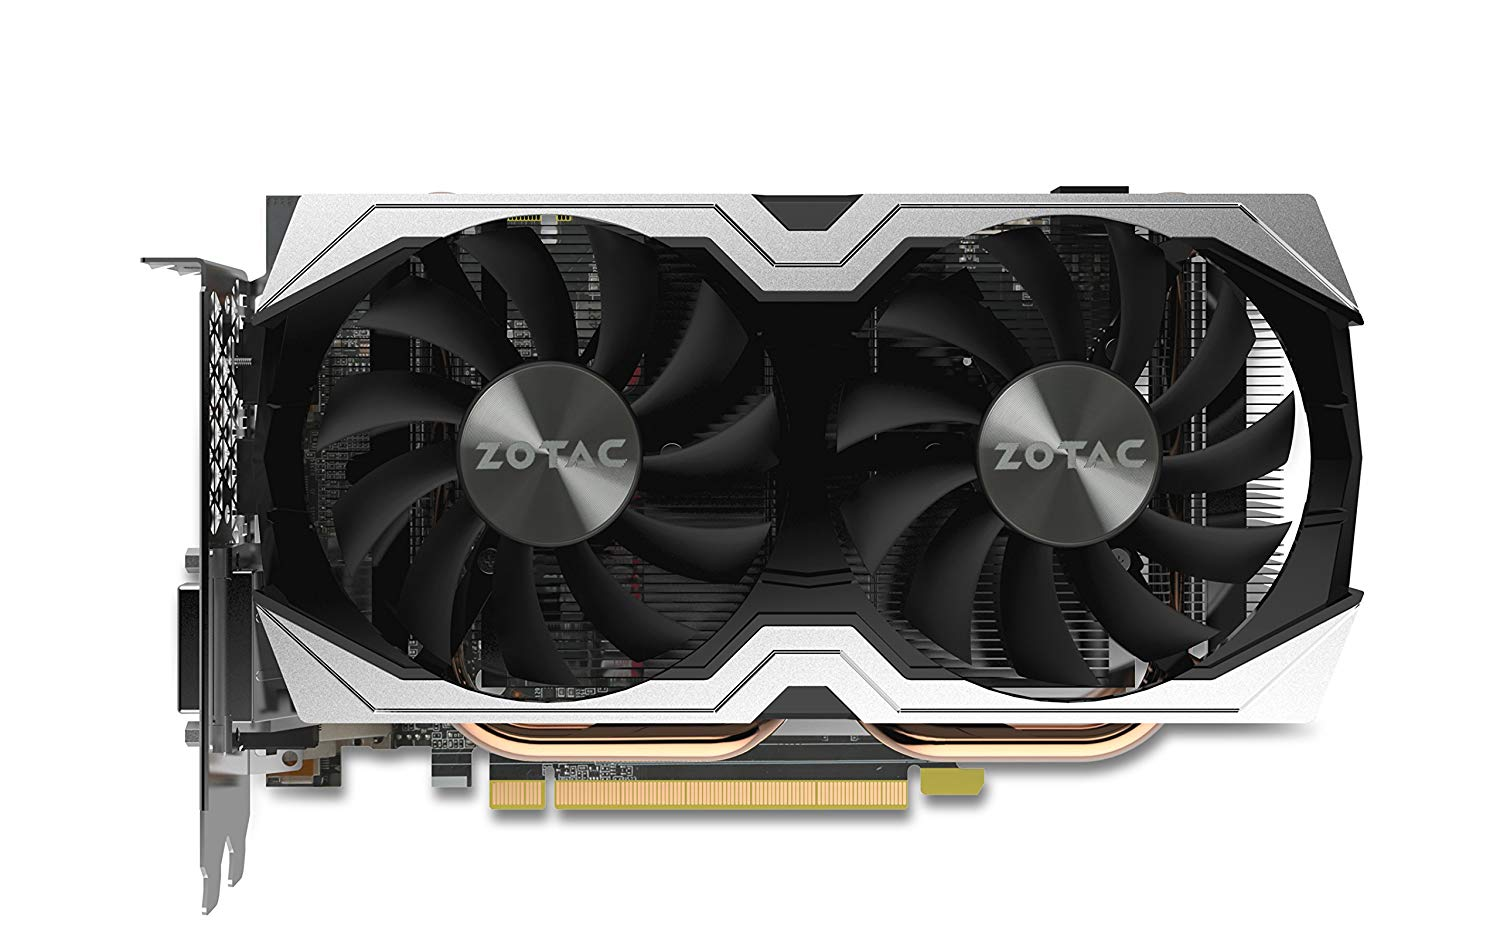 Do You Need a GPU for a PC? guide) – CareerGamers